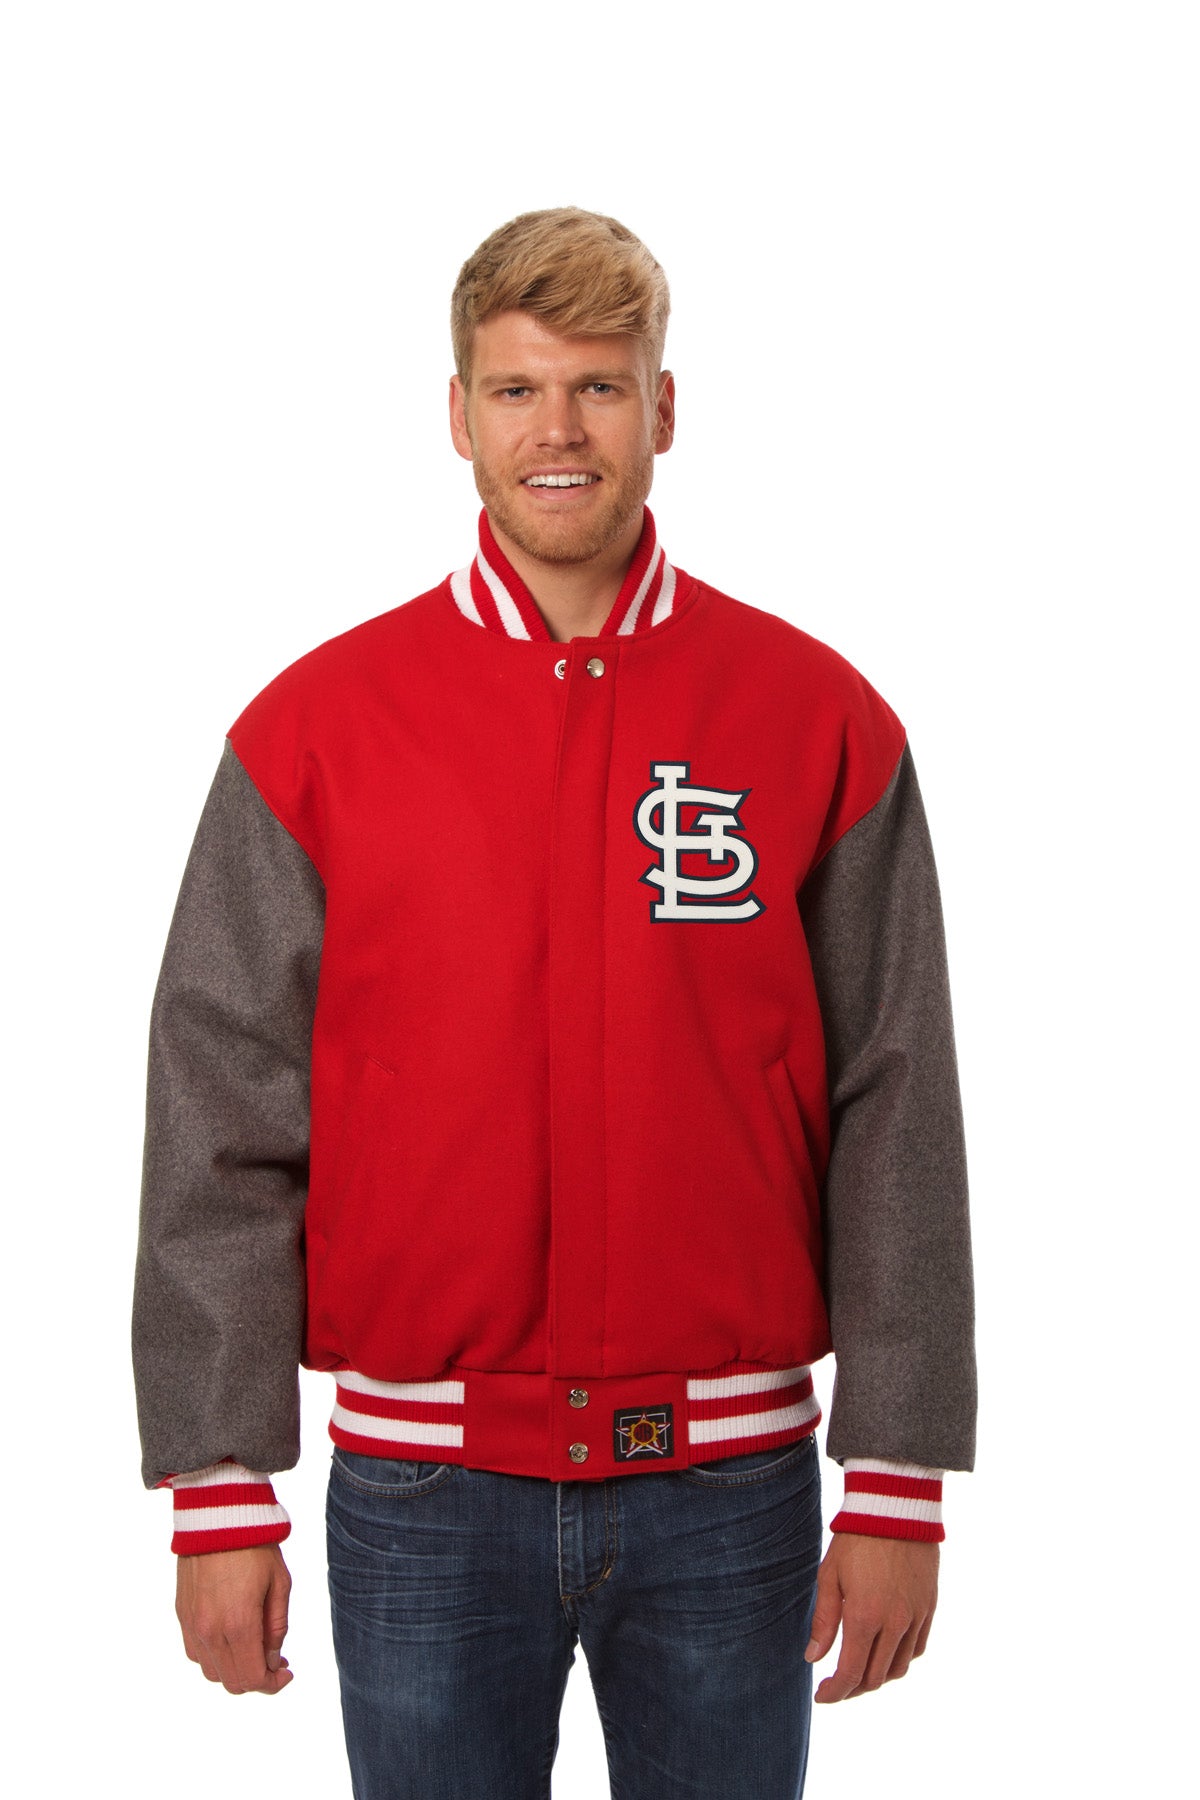 JH Design St. Louis Cardinals Full Leather Jacket - Red Large